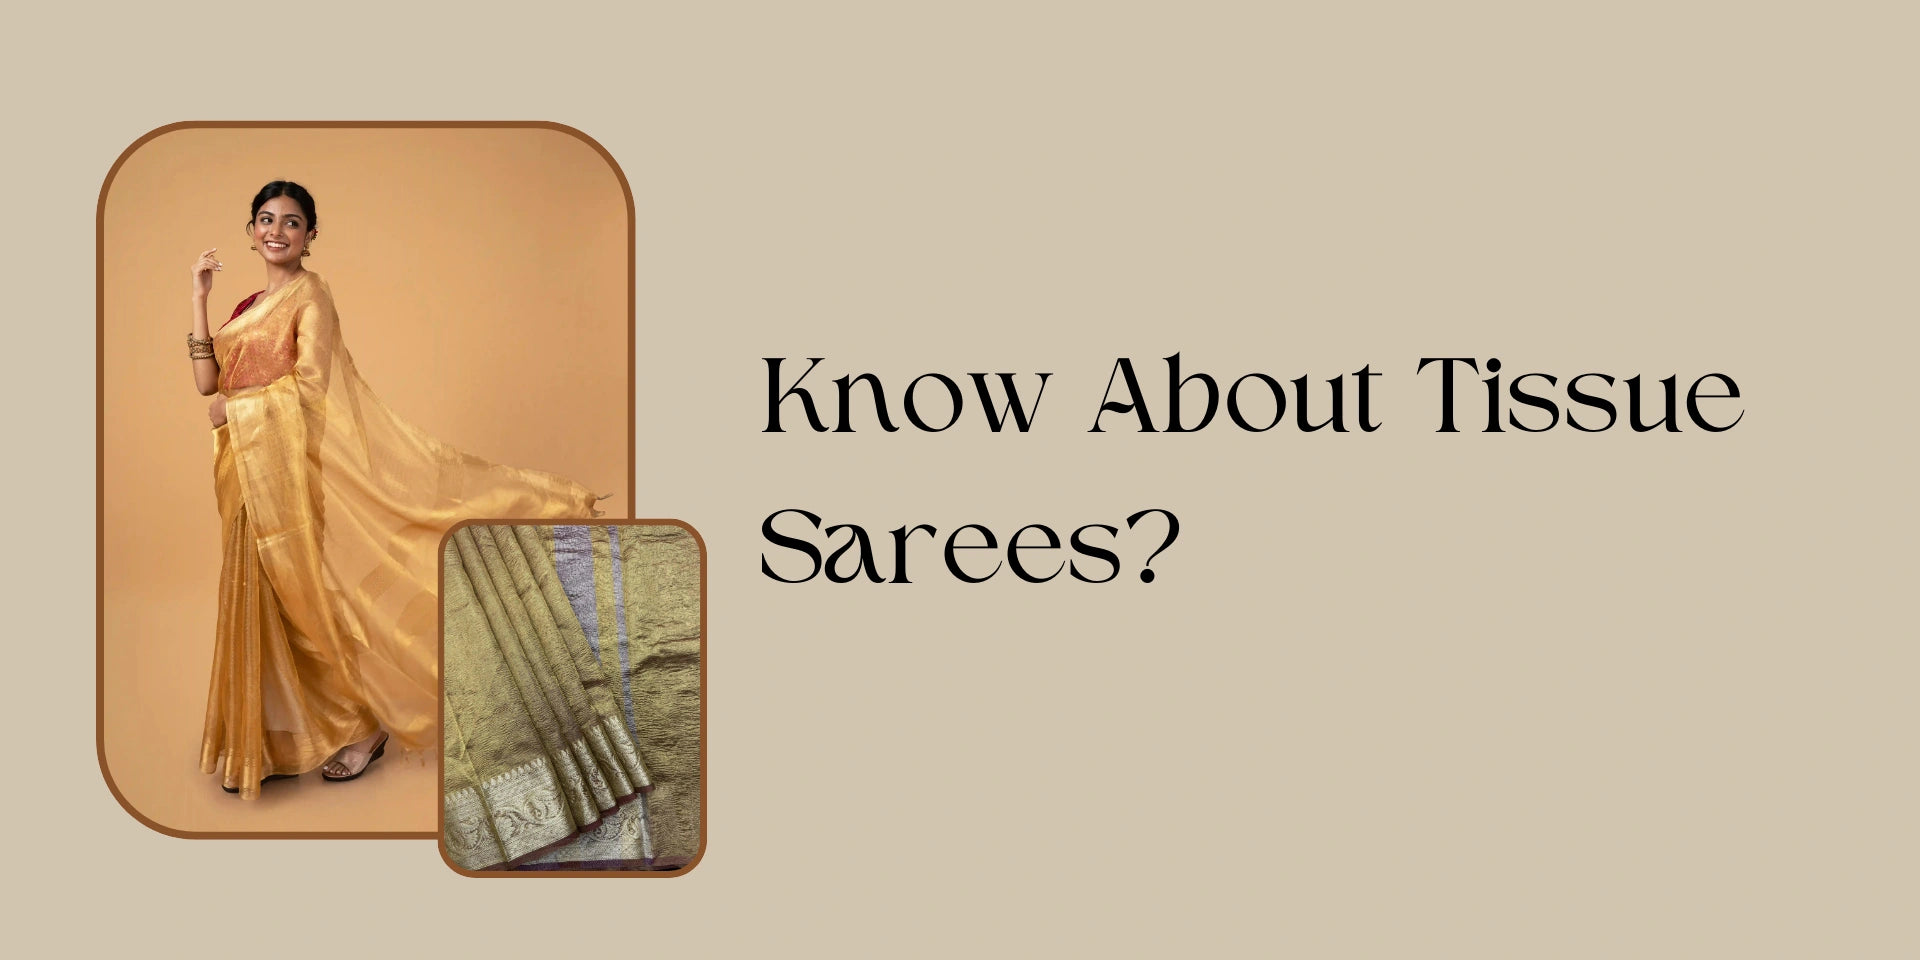 Know About Tissue Sarees?